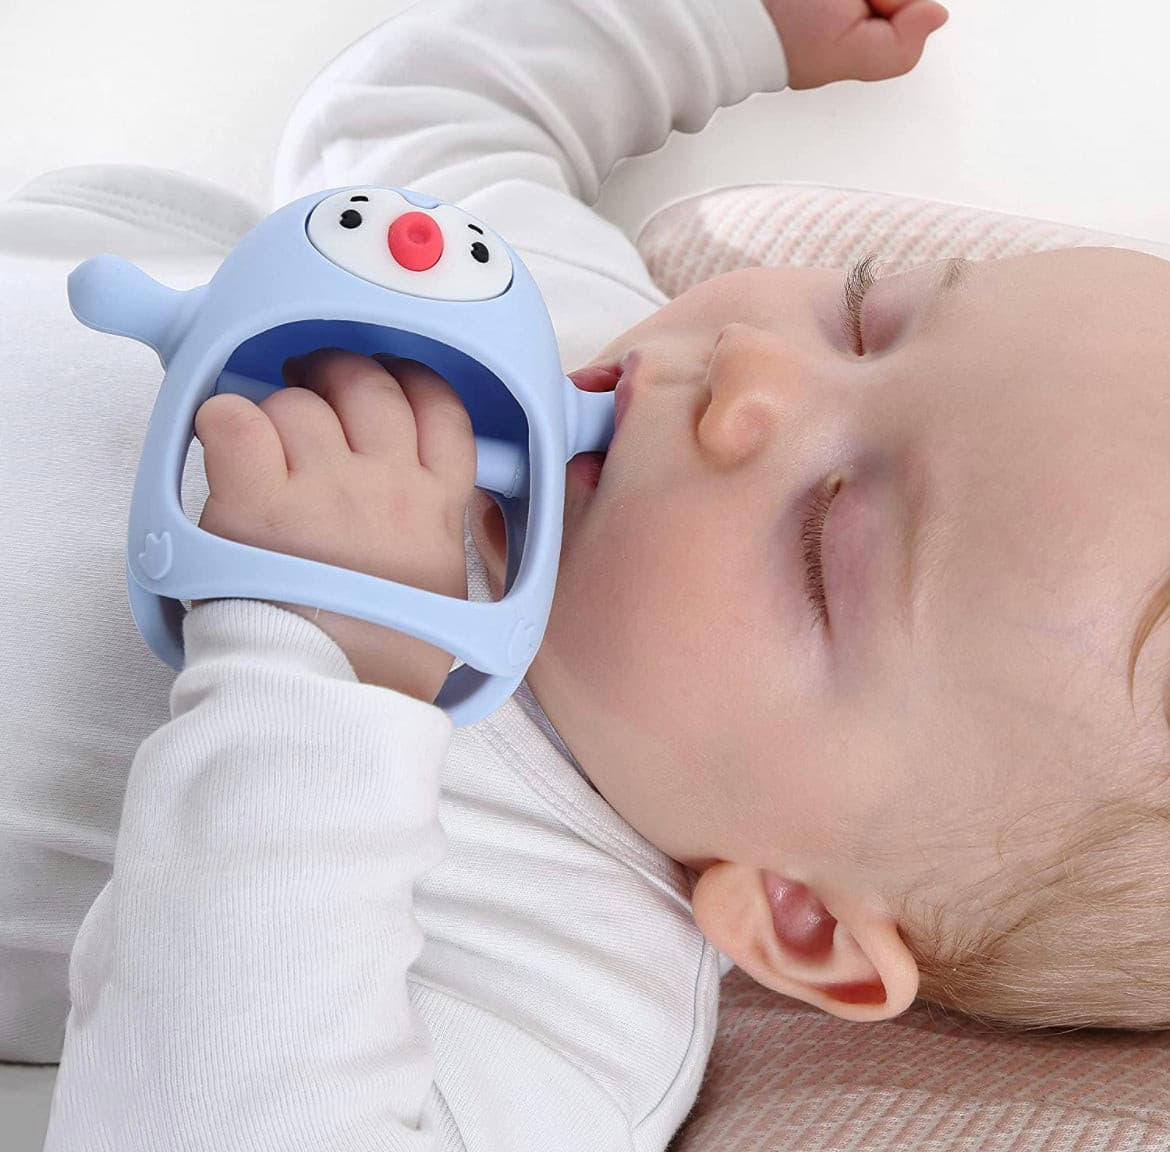 Silicone Baby Teething Toy,Hand Pacifier for Breast Feeding Babies.